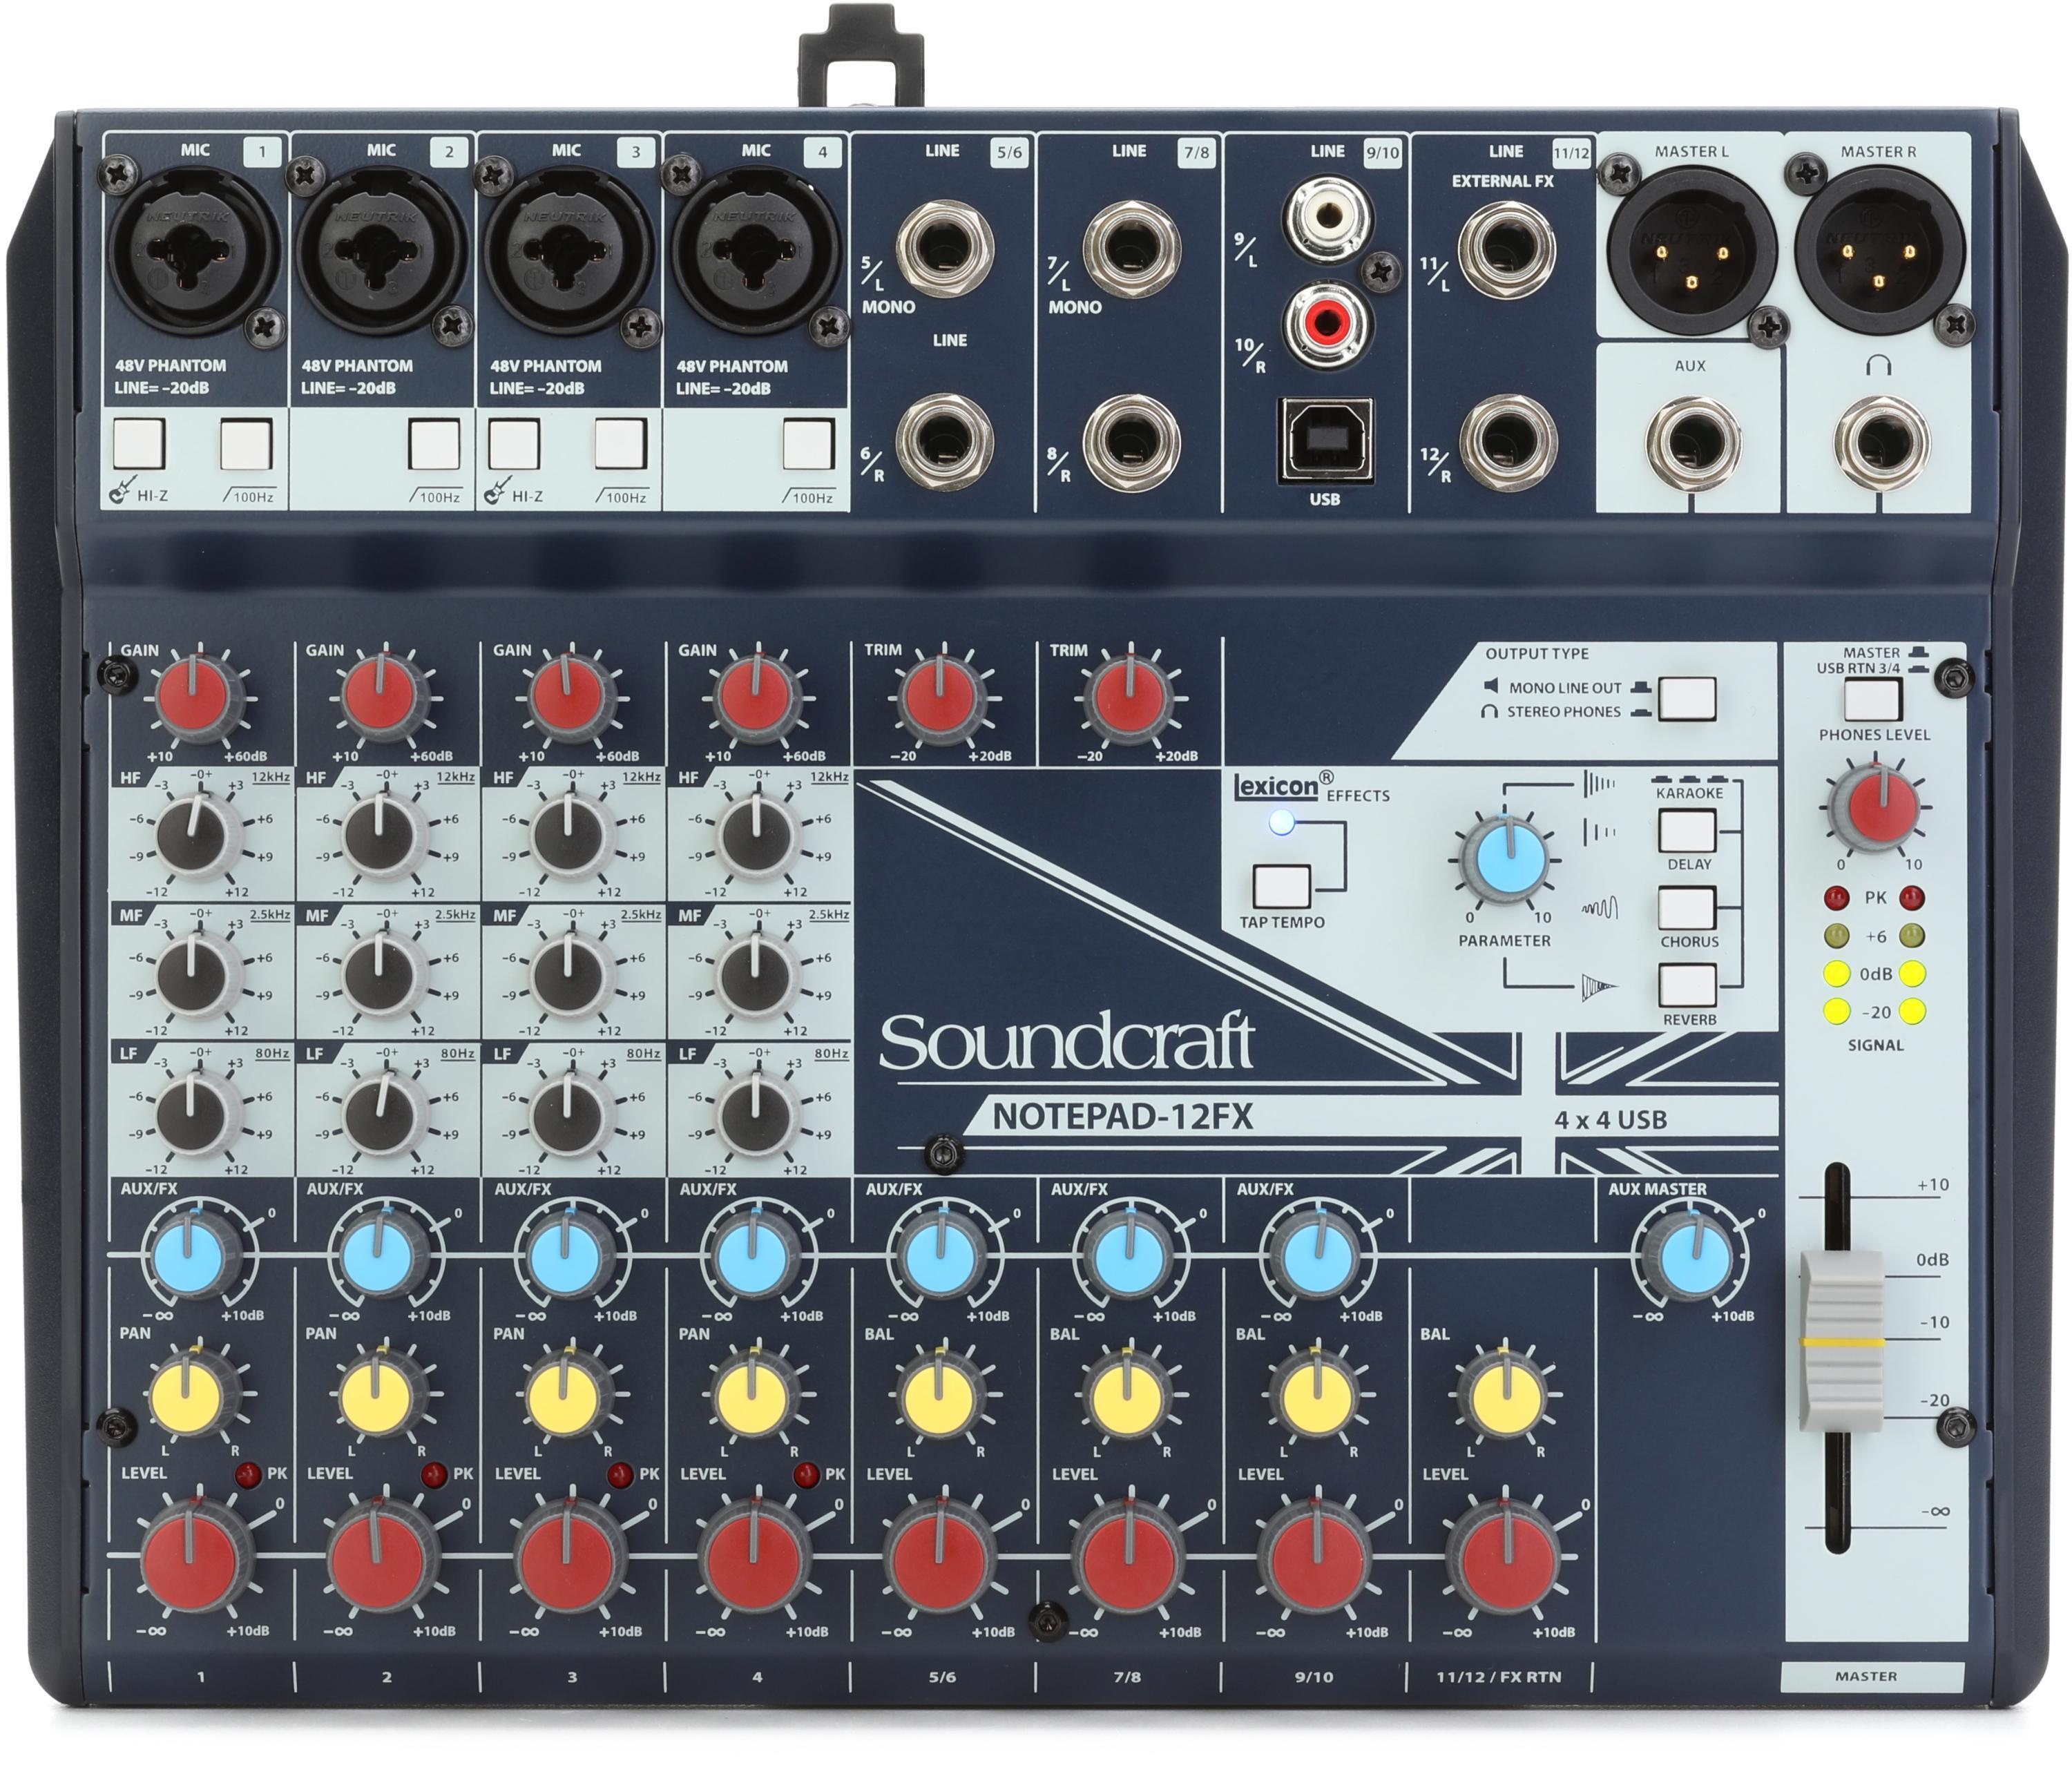 Bundled Item: Soundcraft Notepad-12FX Mixer with Effects and USB